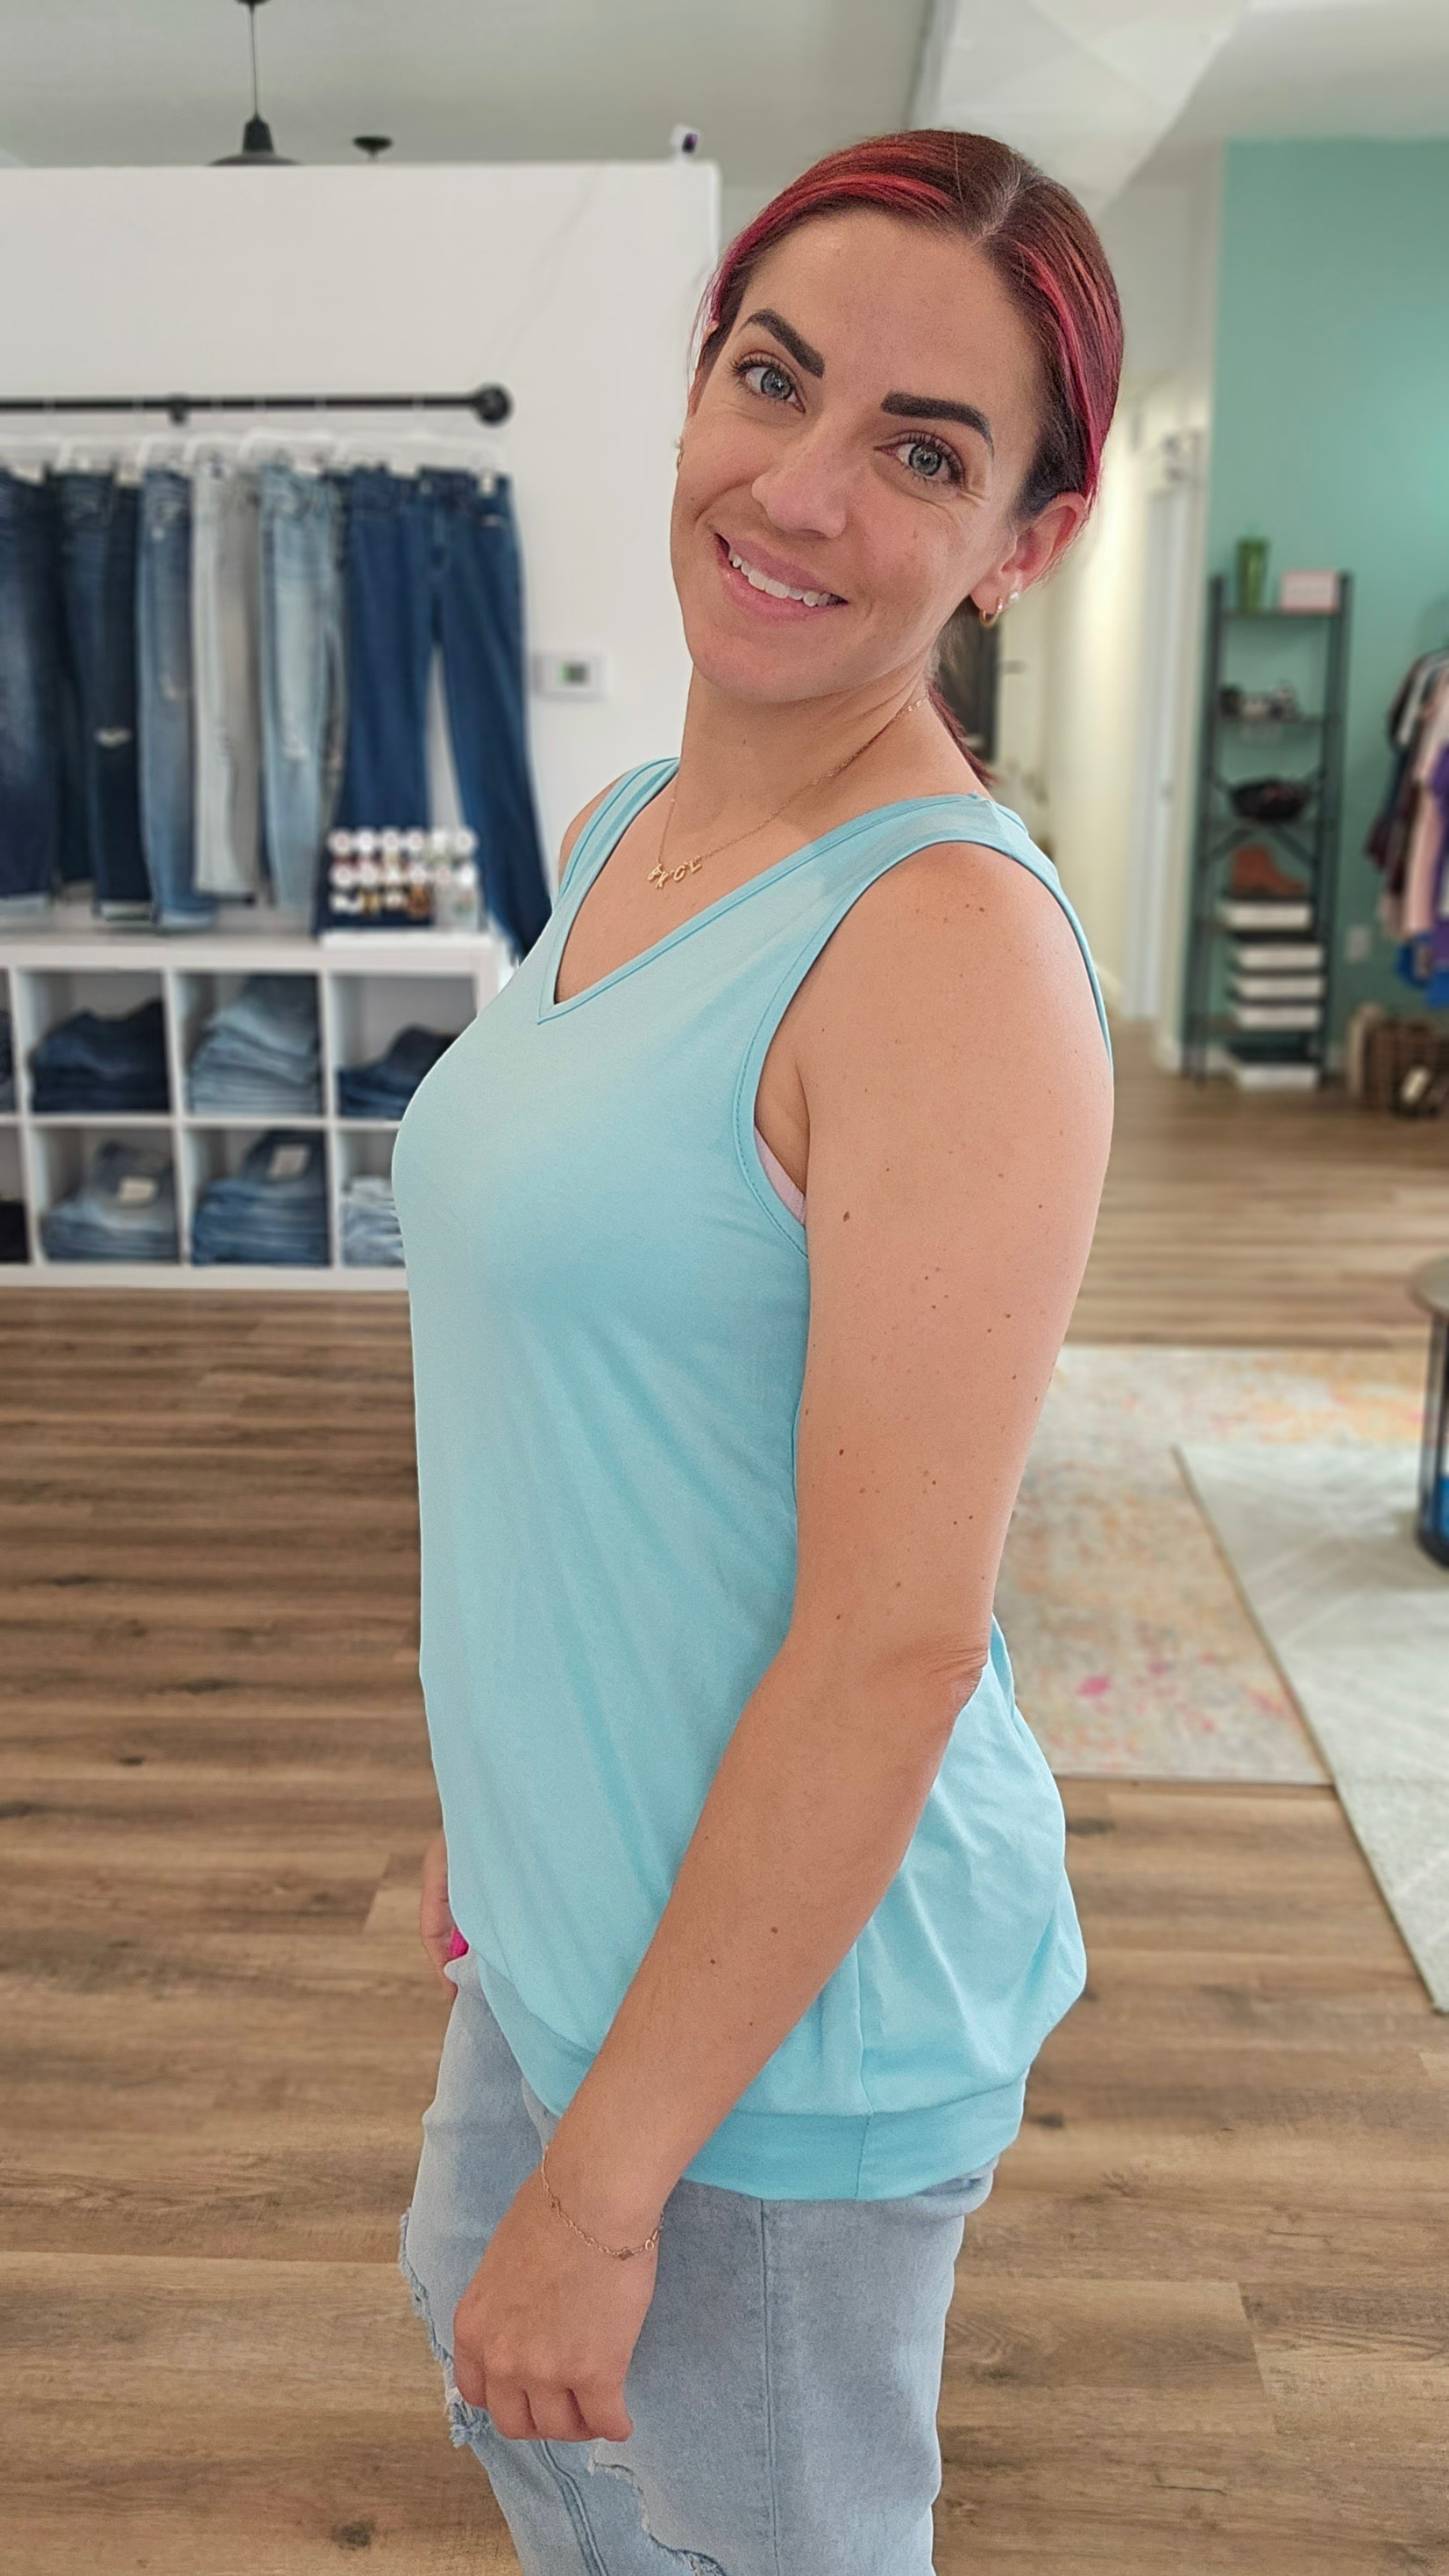 Shop Michele Banded Bottom Tank-Shirts & Tops at Ruby Joy Boutique, a Women's Clothing Store in Pickerington, Ohio